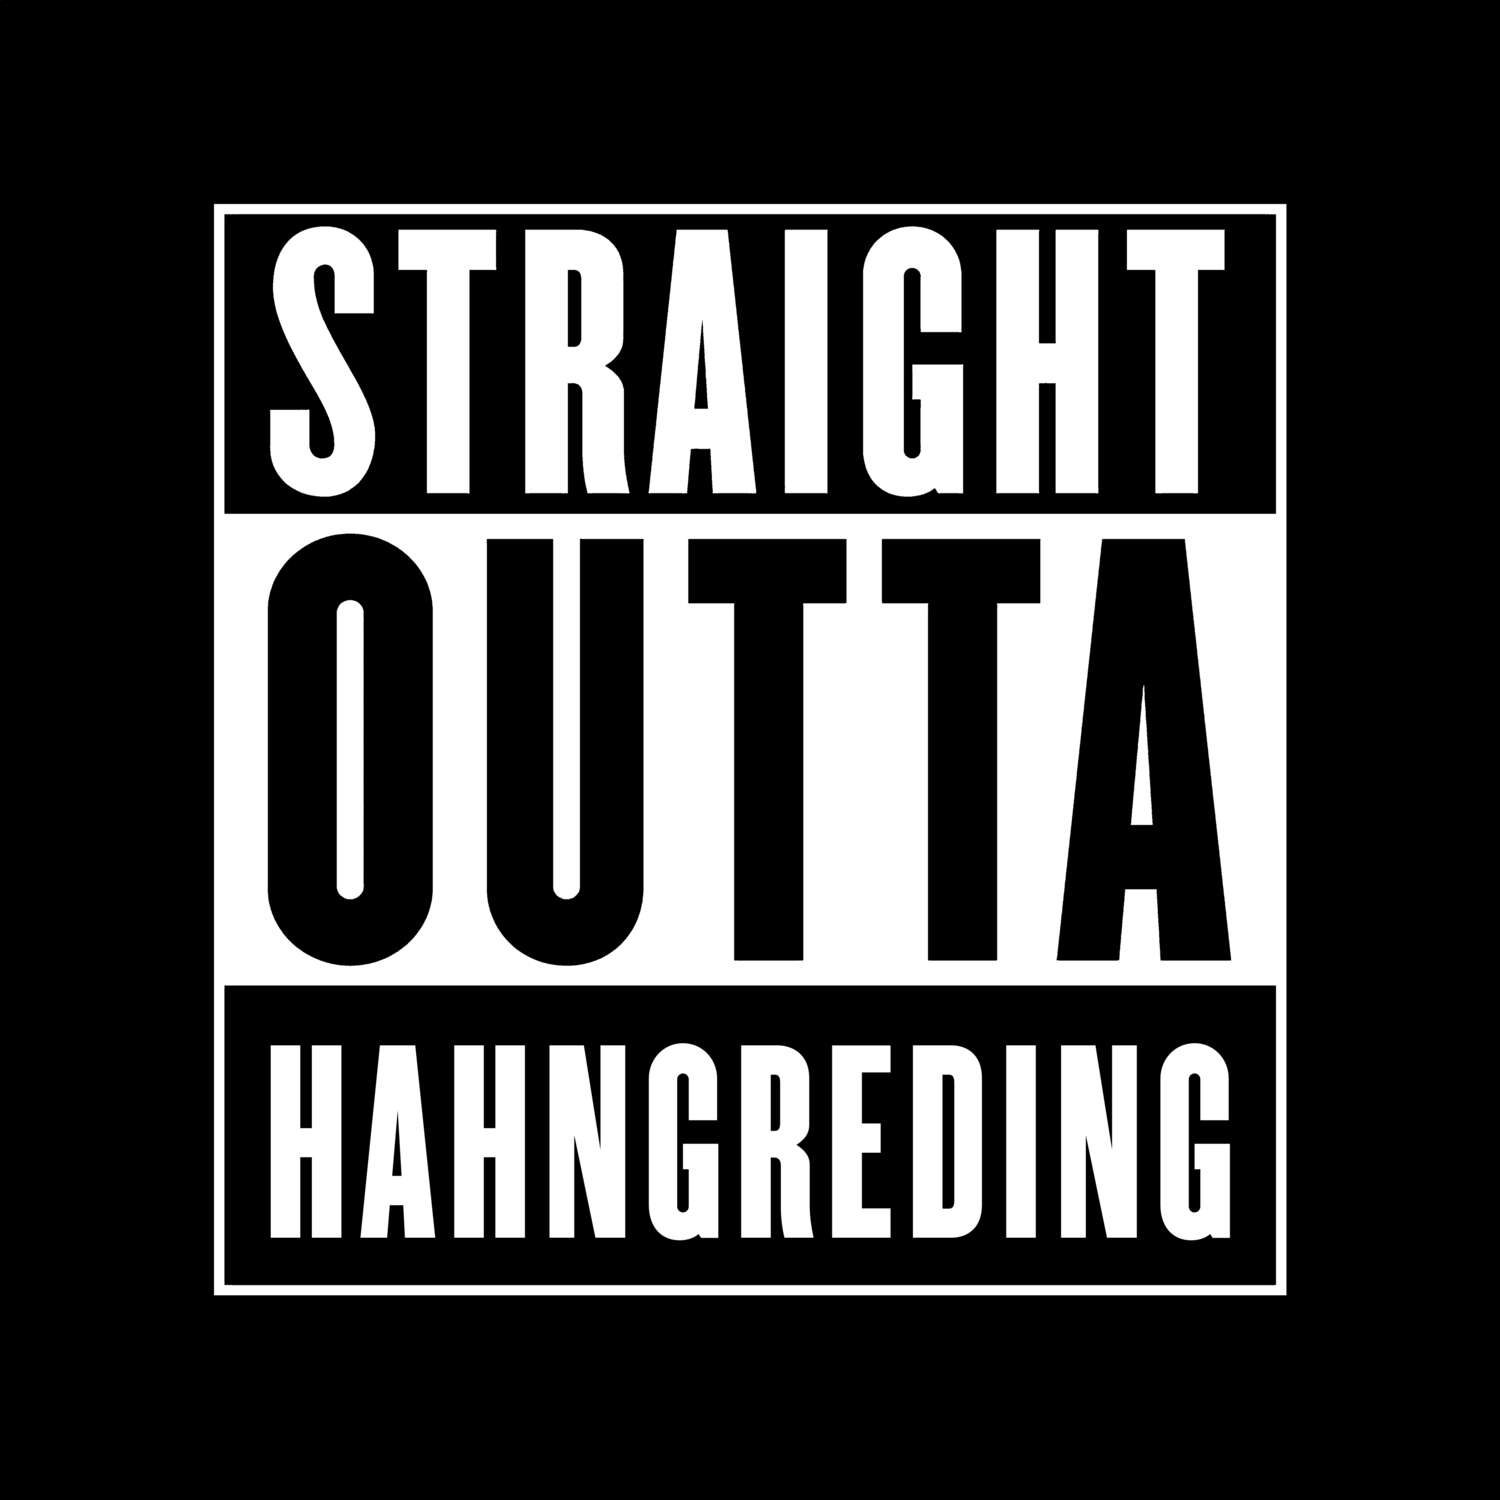 Hahngreding T-Shirt »Straight Outta«